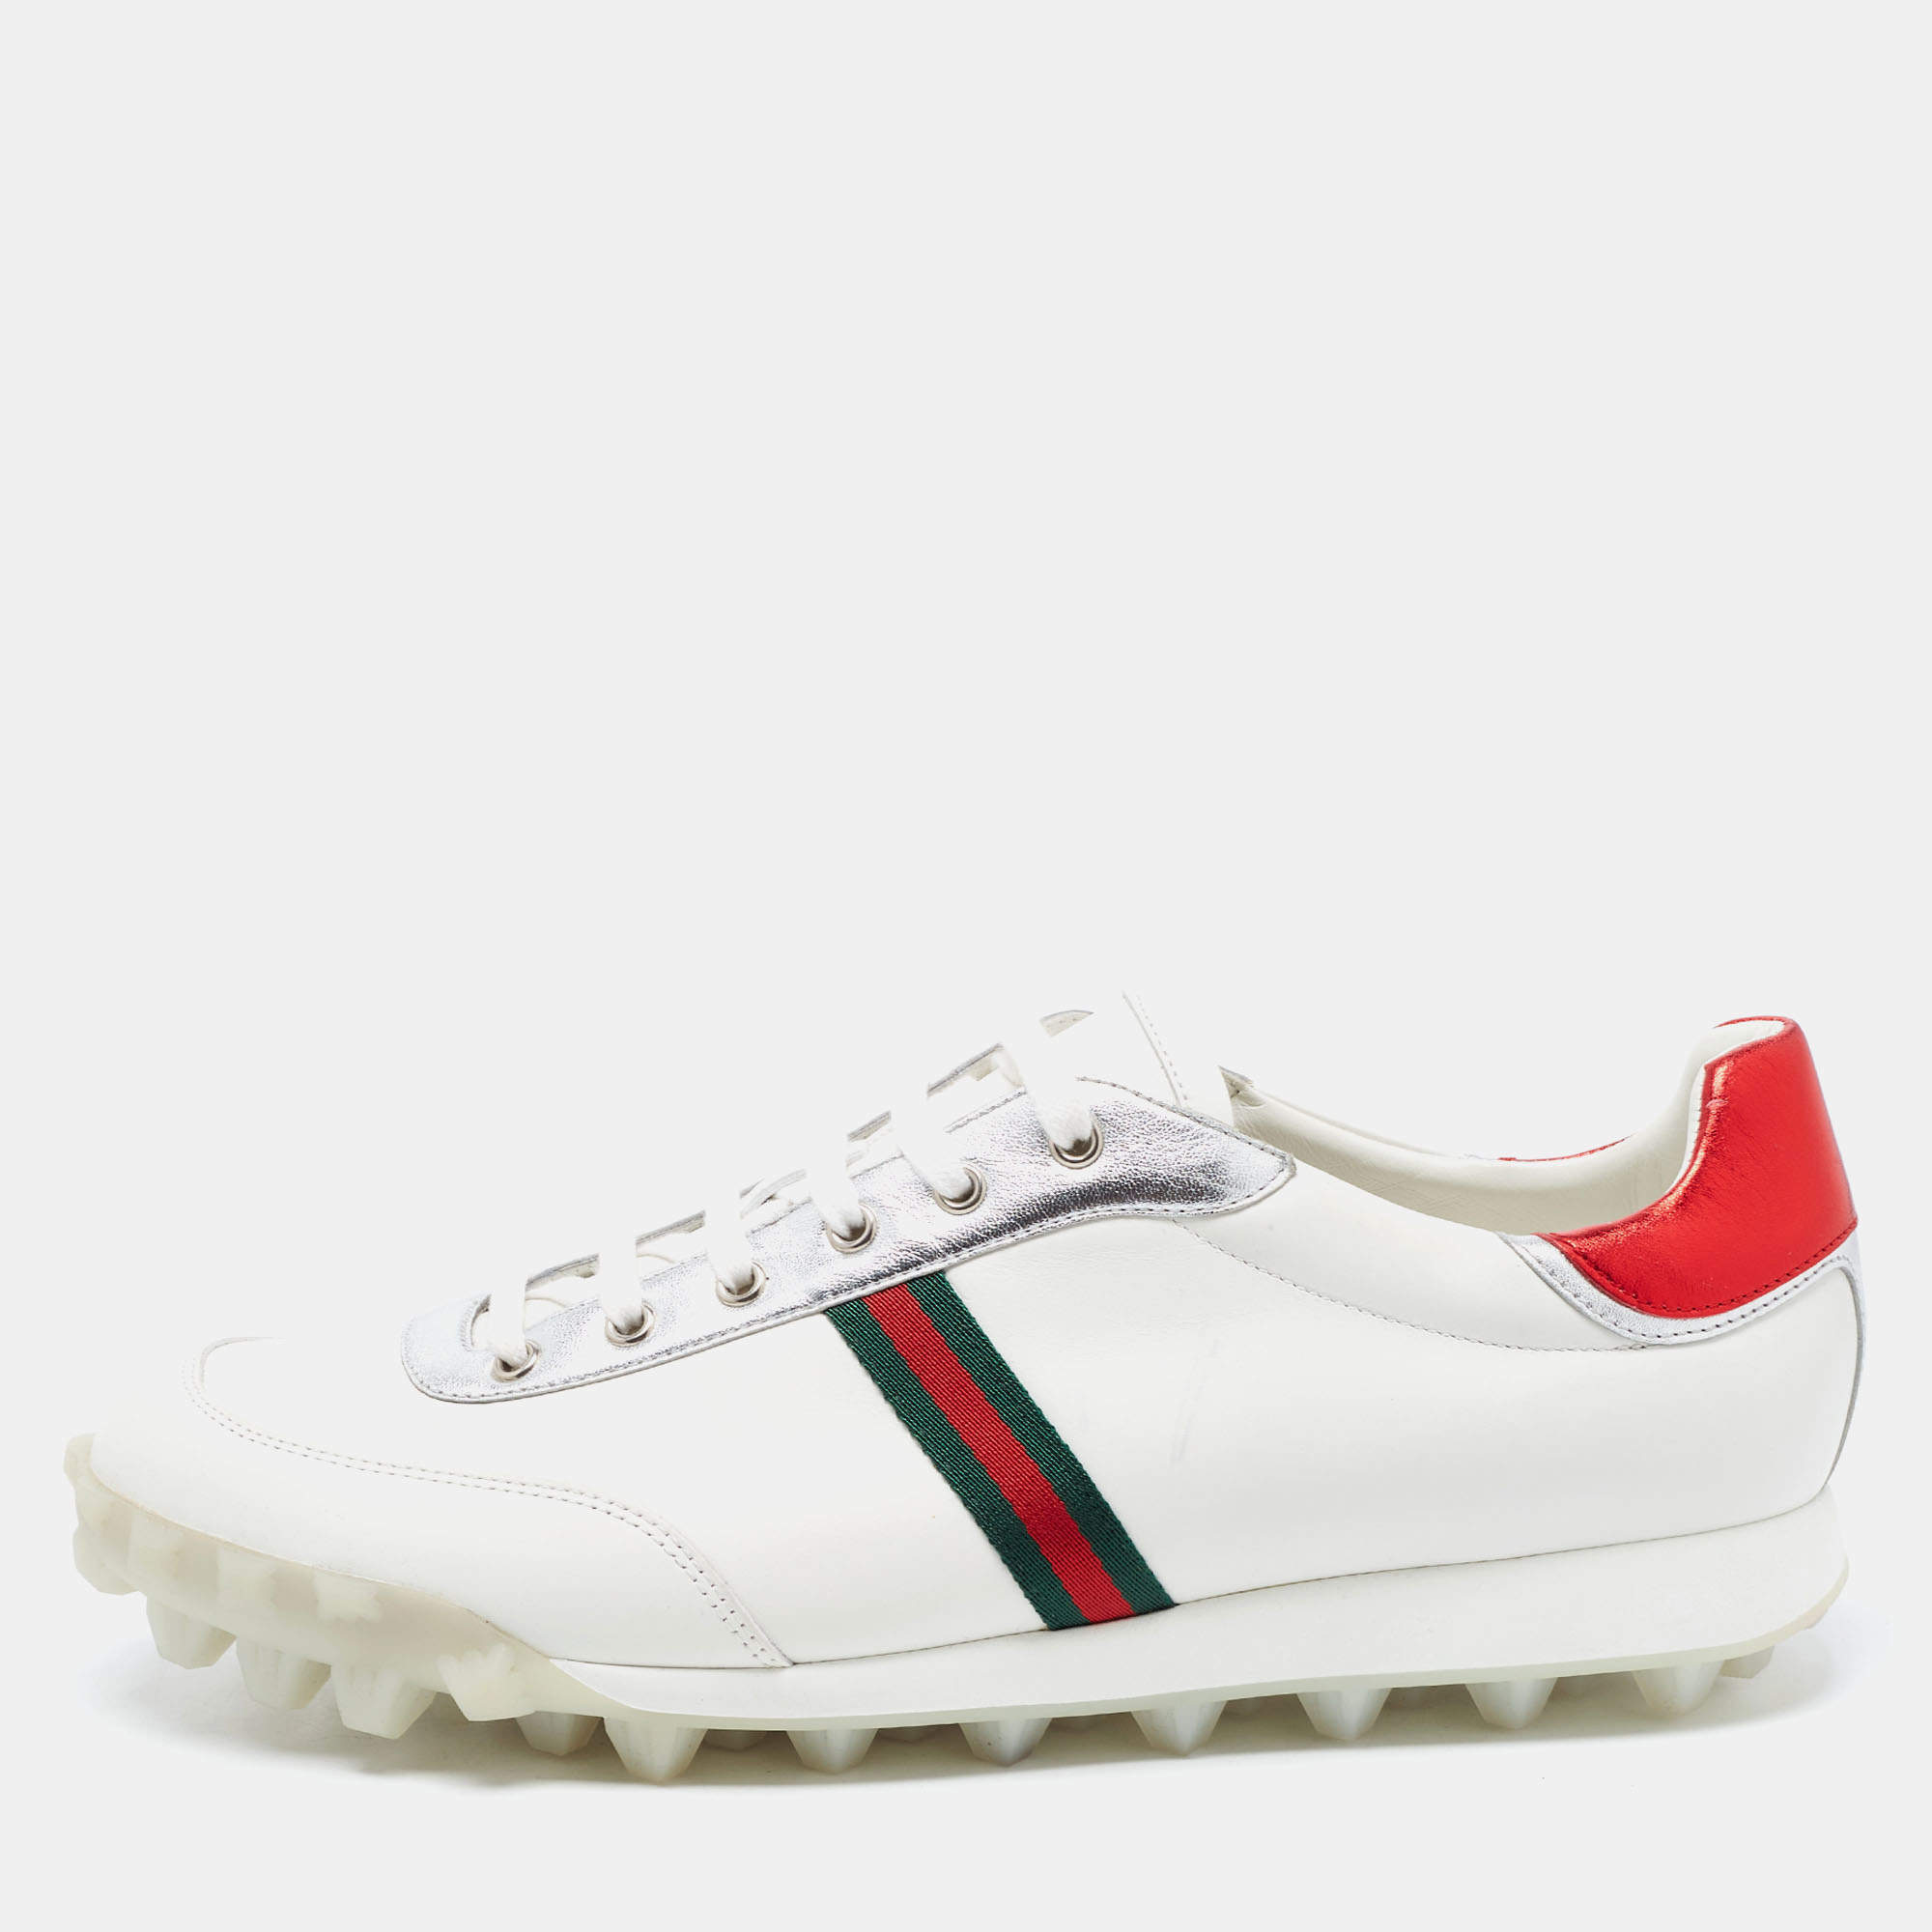 Gucci Tricolor Leather ACE Web Low Top Sneakers Size 46